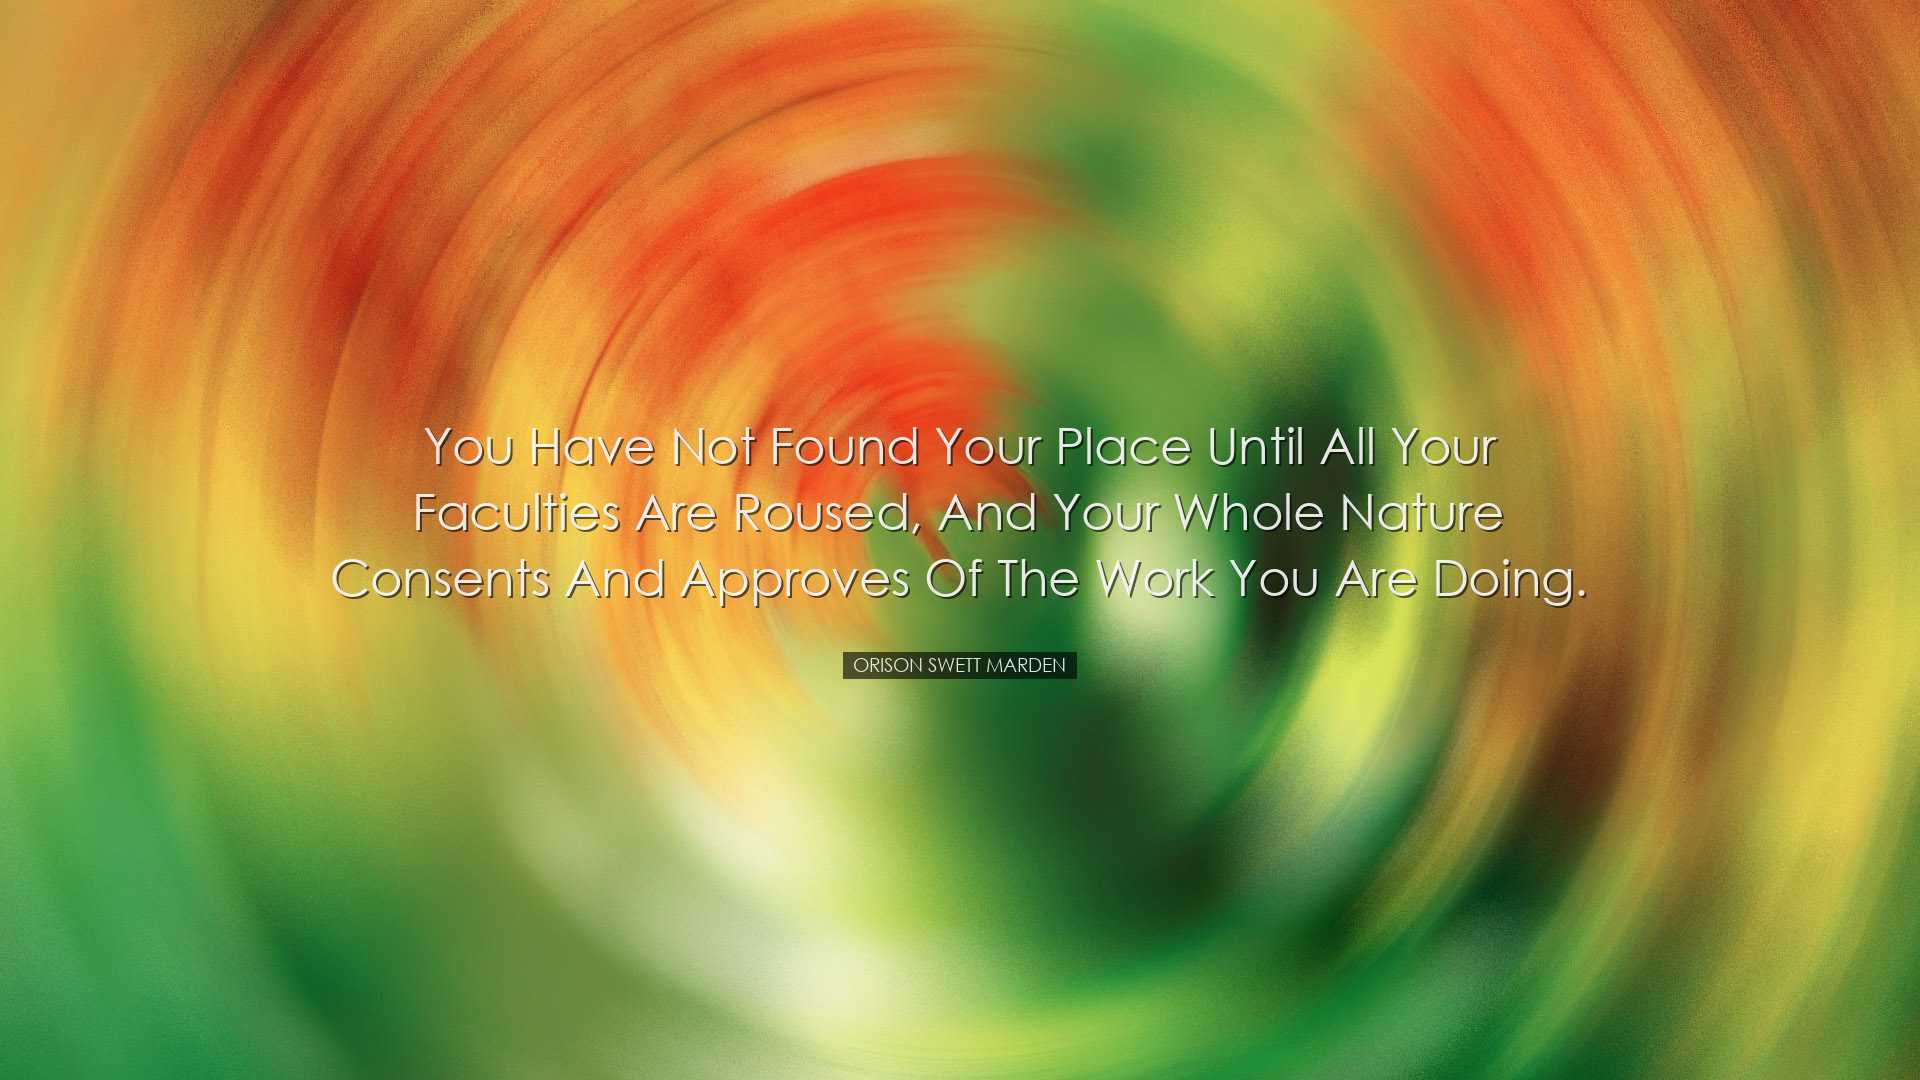 You have not found your place until all your faculties are roused,